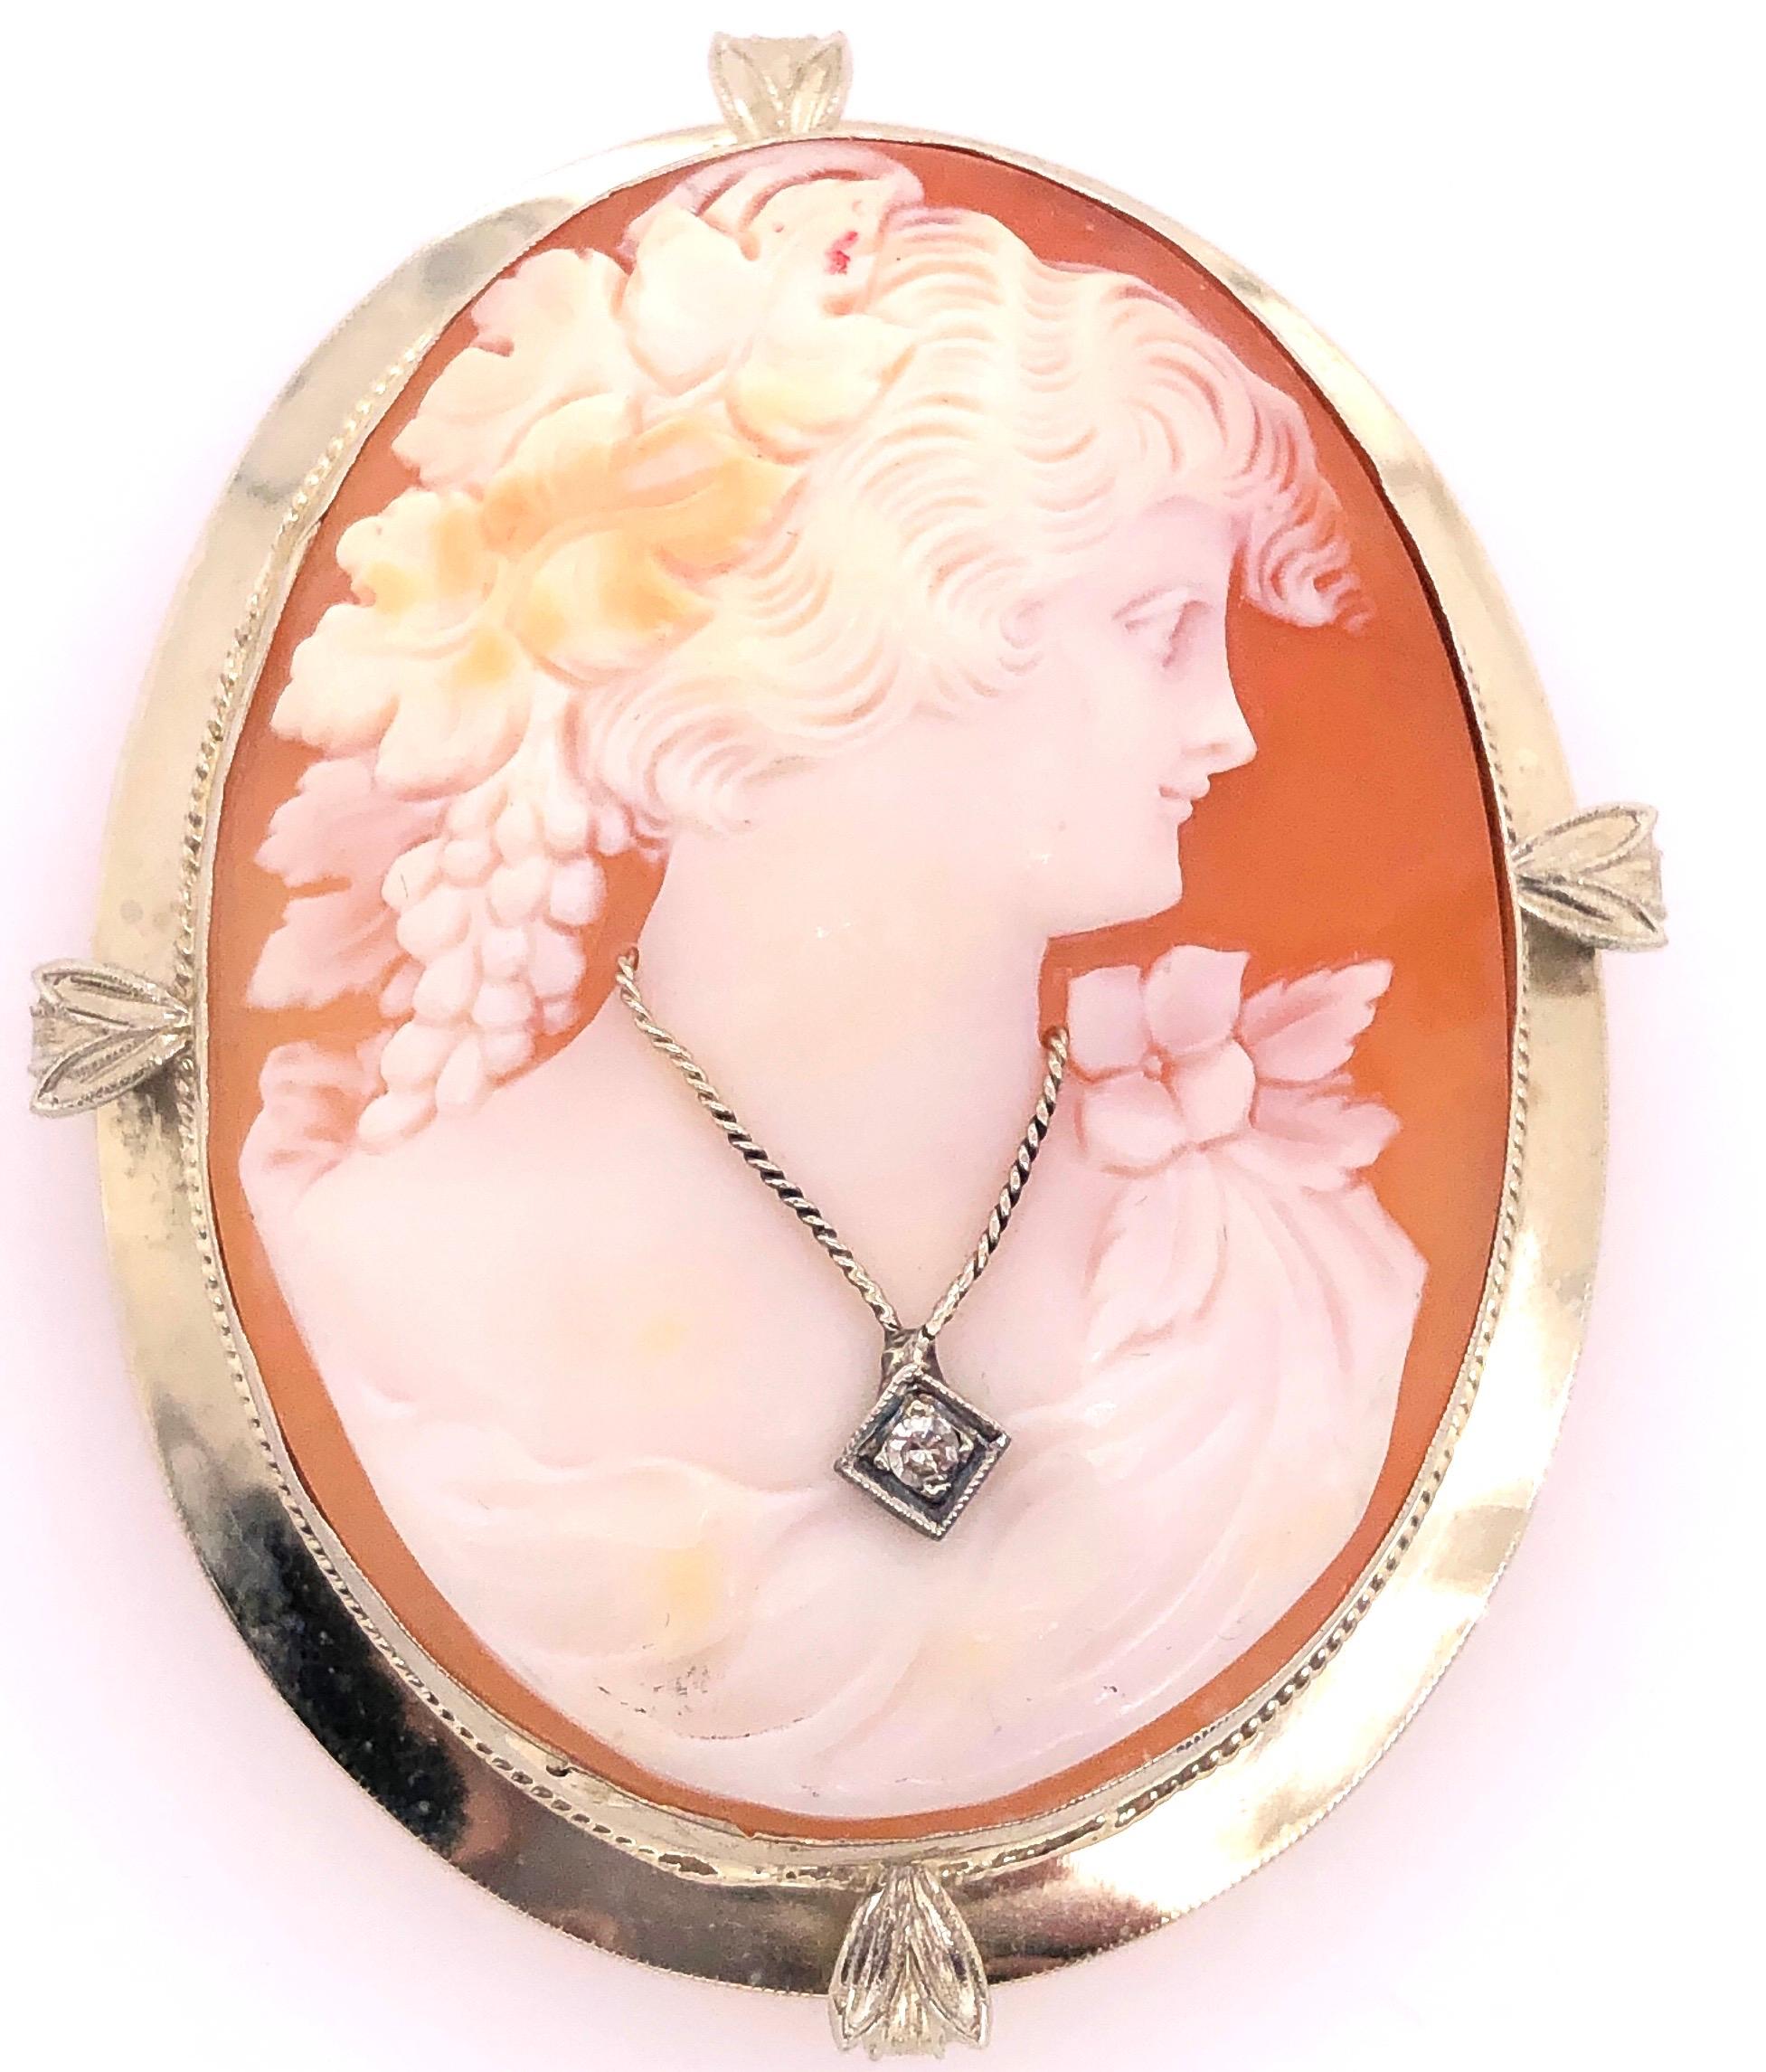 Women's or Men's 14 Karat White Gold Cameo Brooch and Pendant Woman Profile with Diamond Necklace For Sale